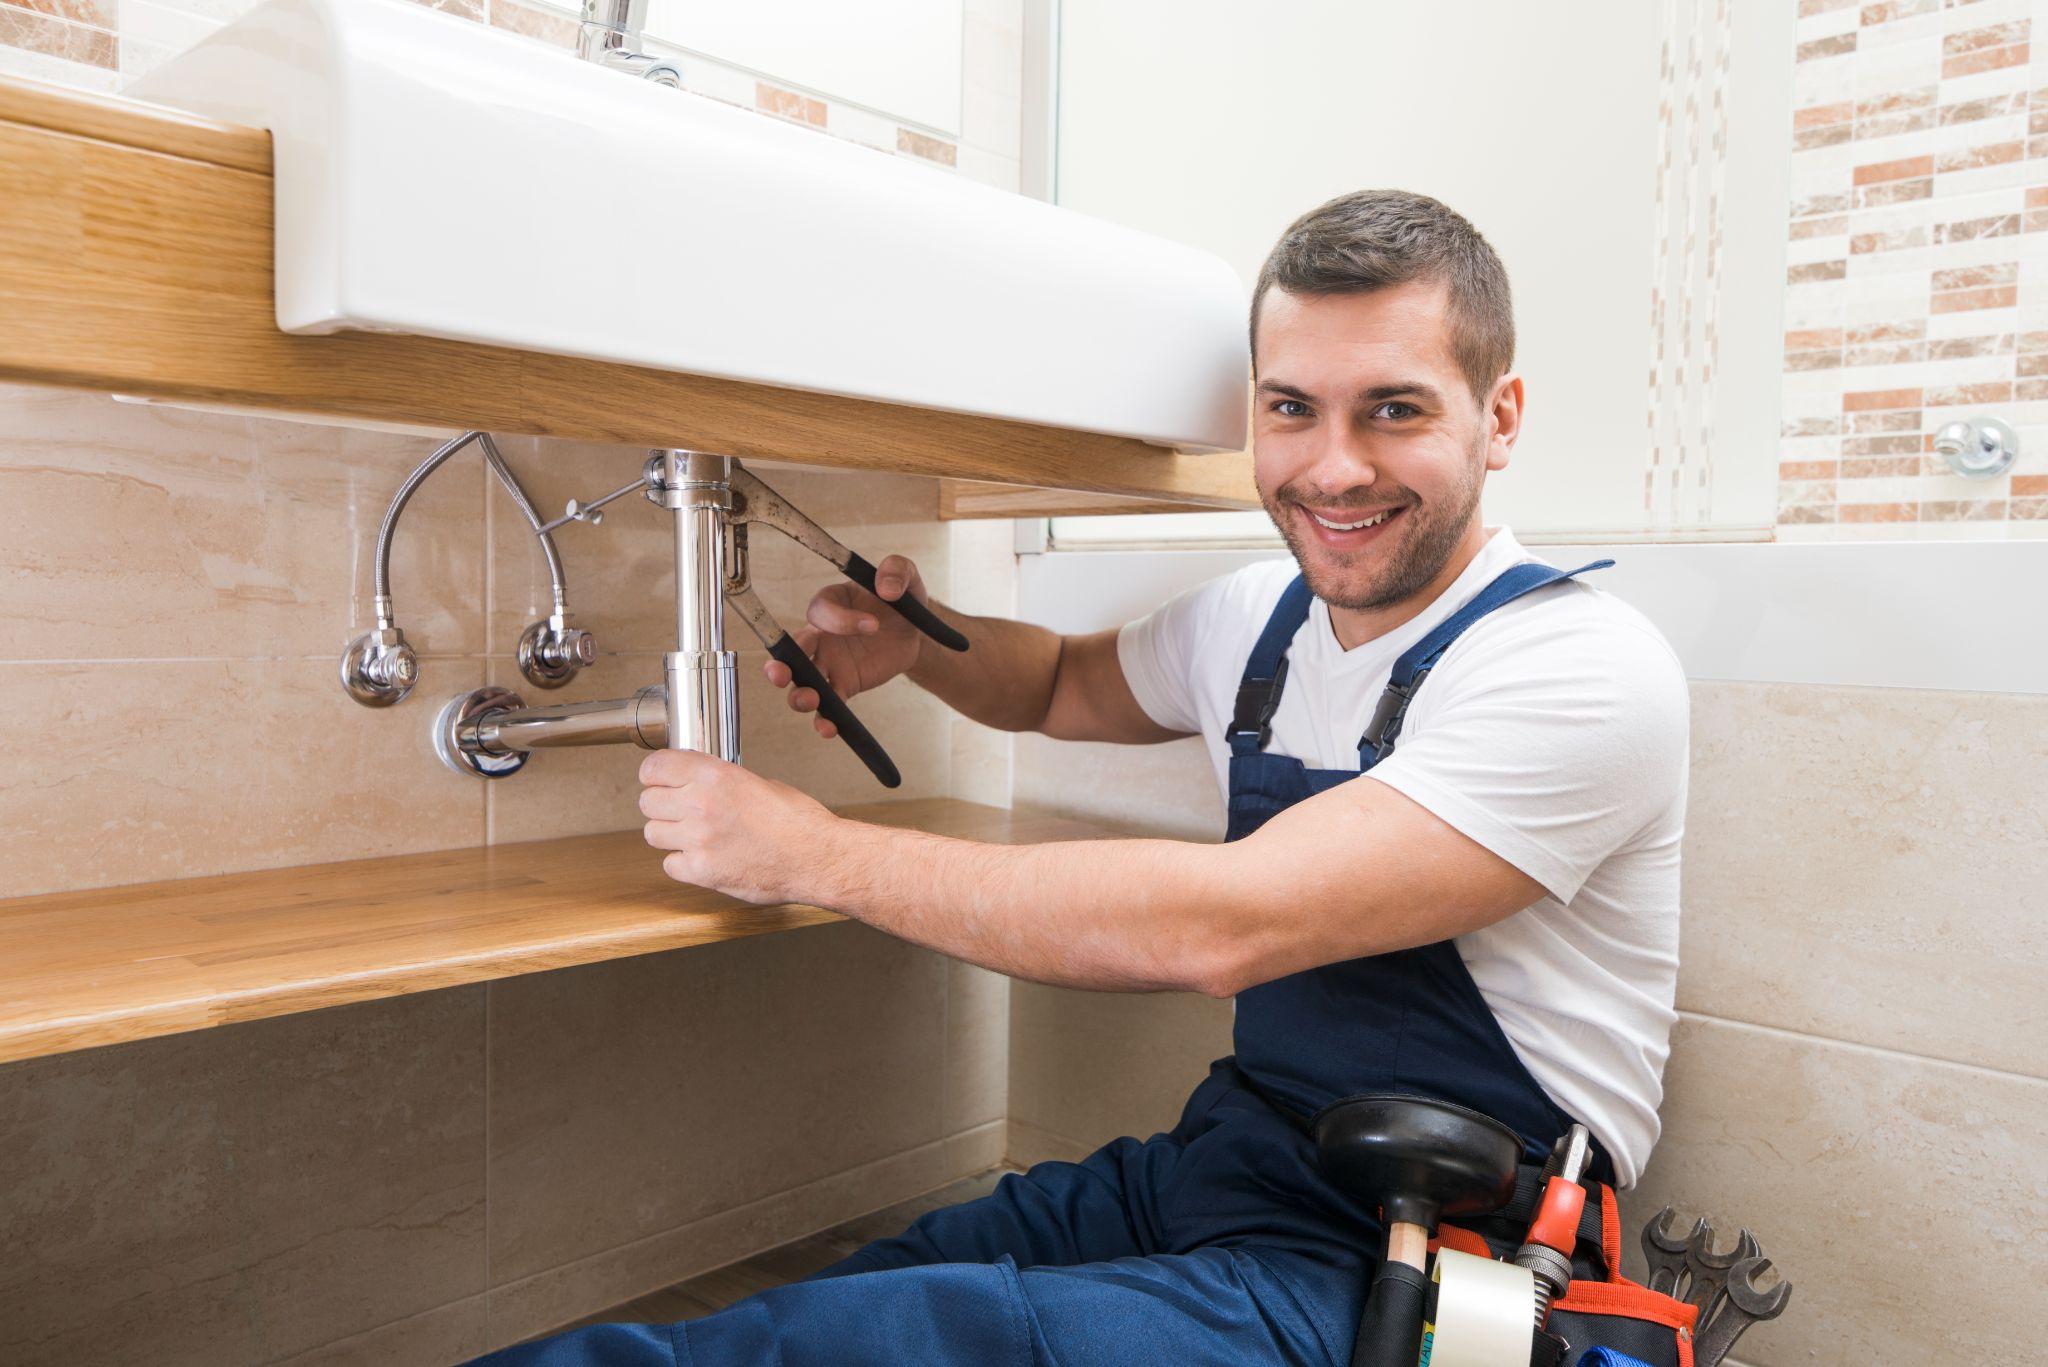 Plumbers In Central London - Everything You Need To Know